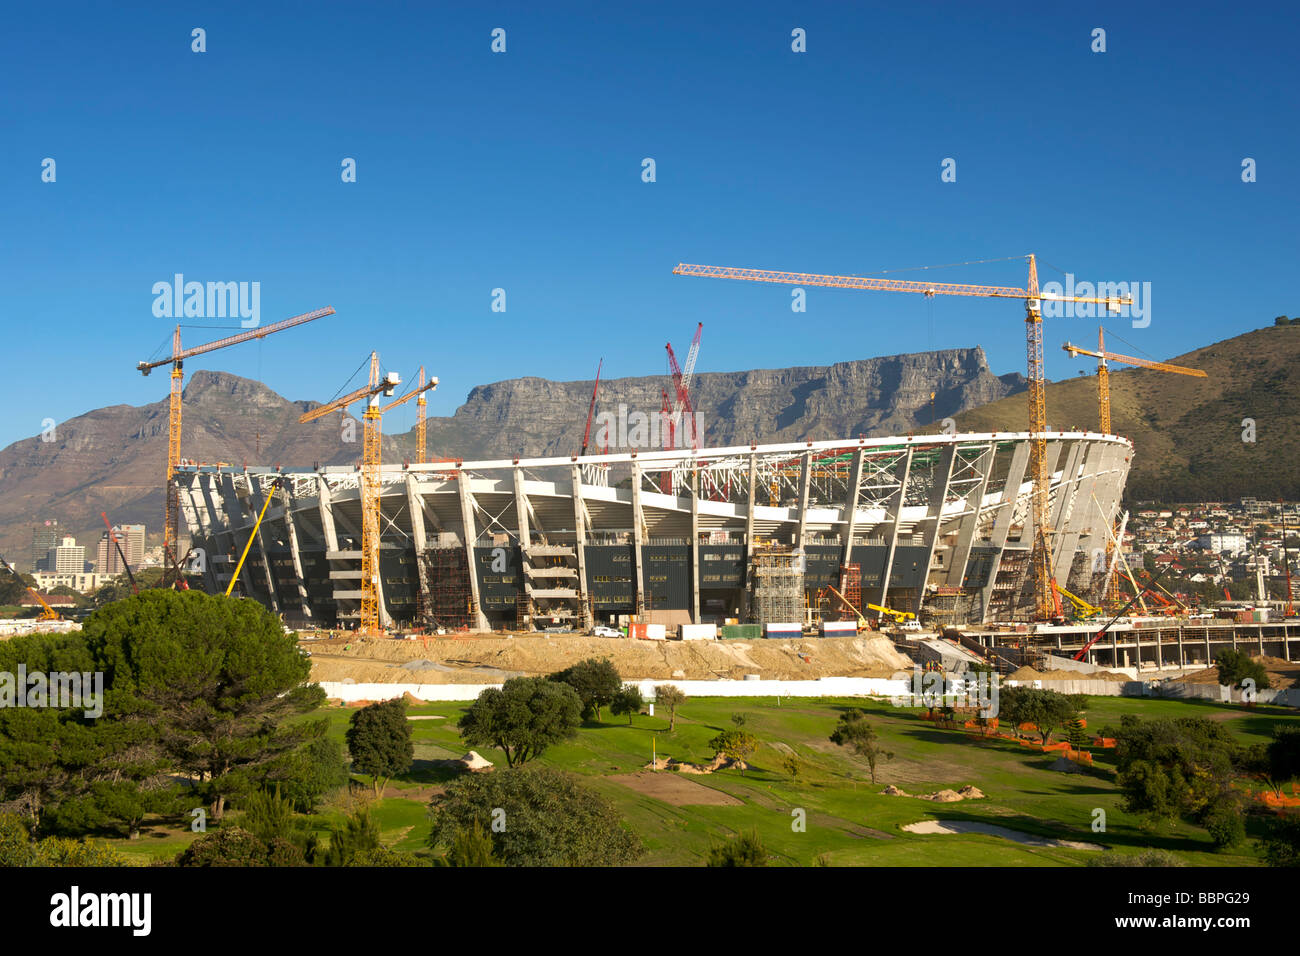 The FIFA 2010 world cup soccer stadium under construction in Green Point, Cape Town with Table Mountain in the background. Stock Photo